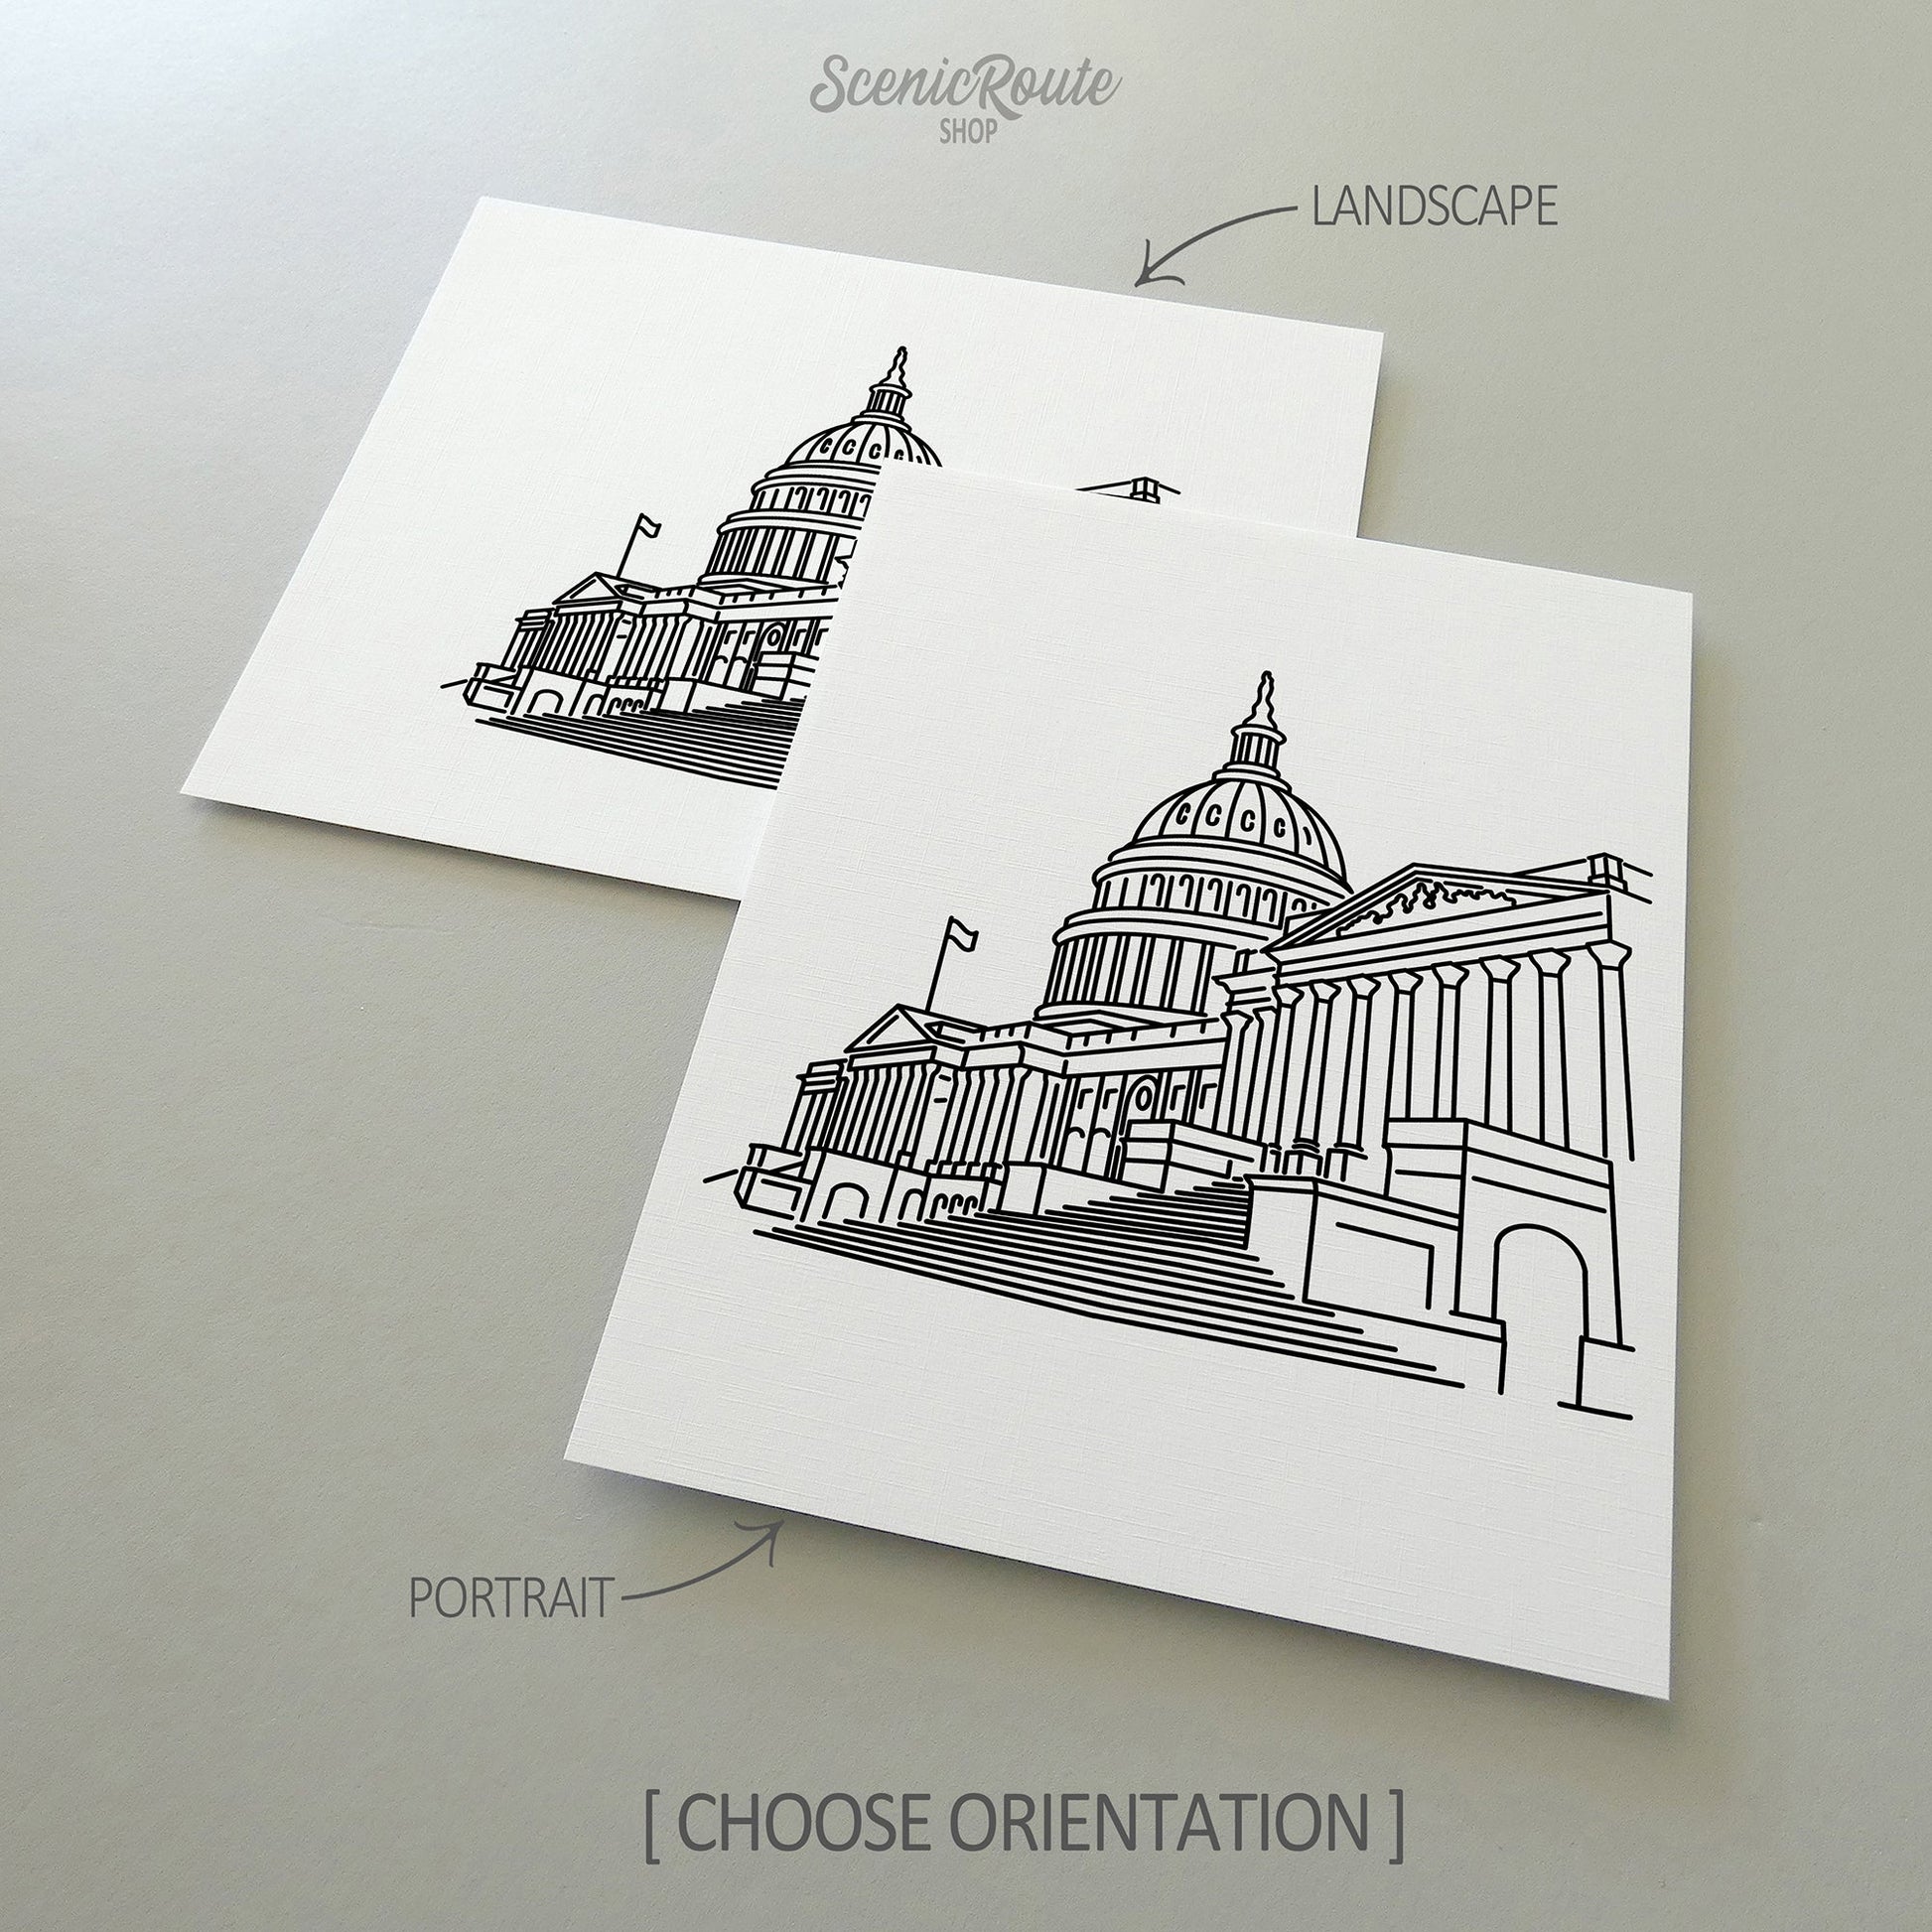 Two line art drawings of the Capitol on white linen paper with a gray background.  The pieces are shown in portrait and landscape orientation for the available art print options.